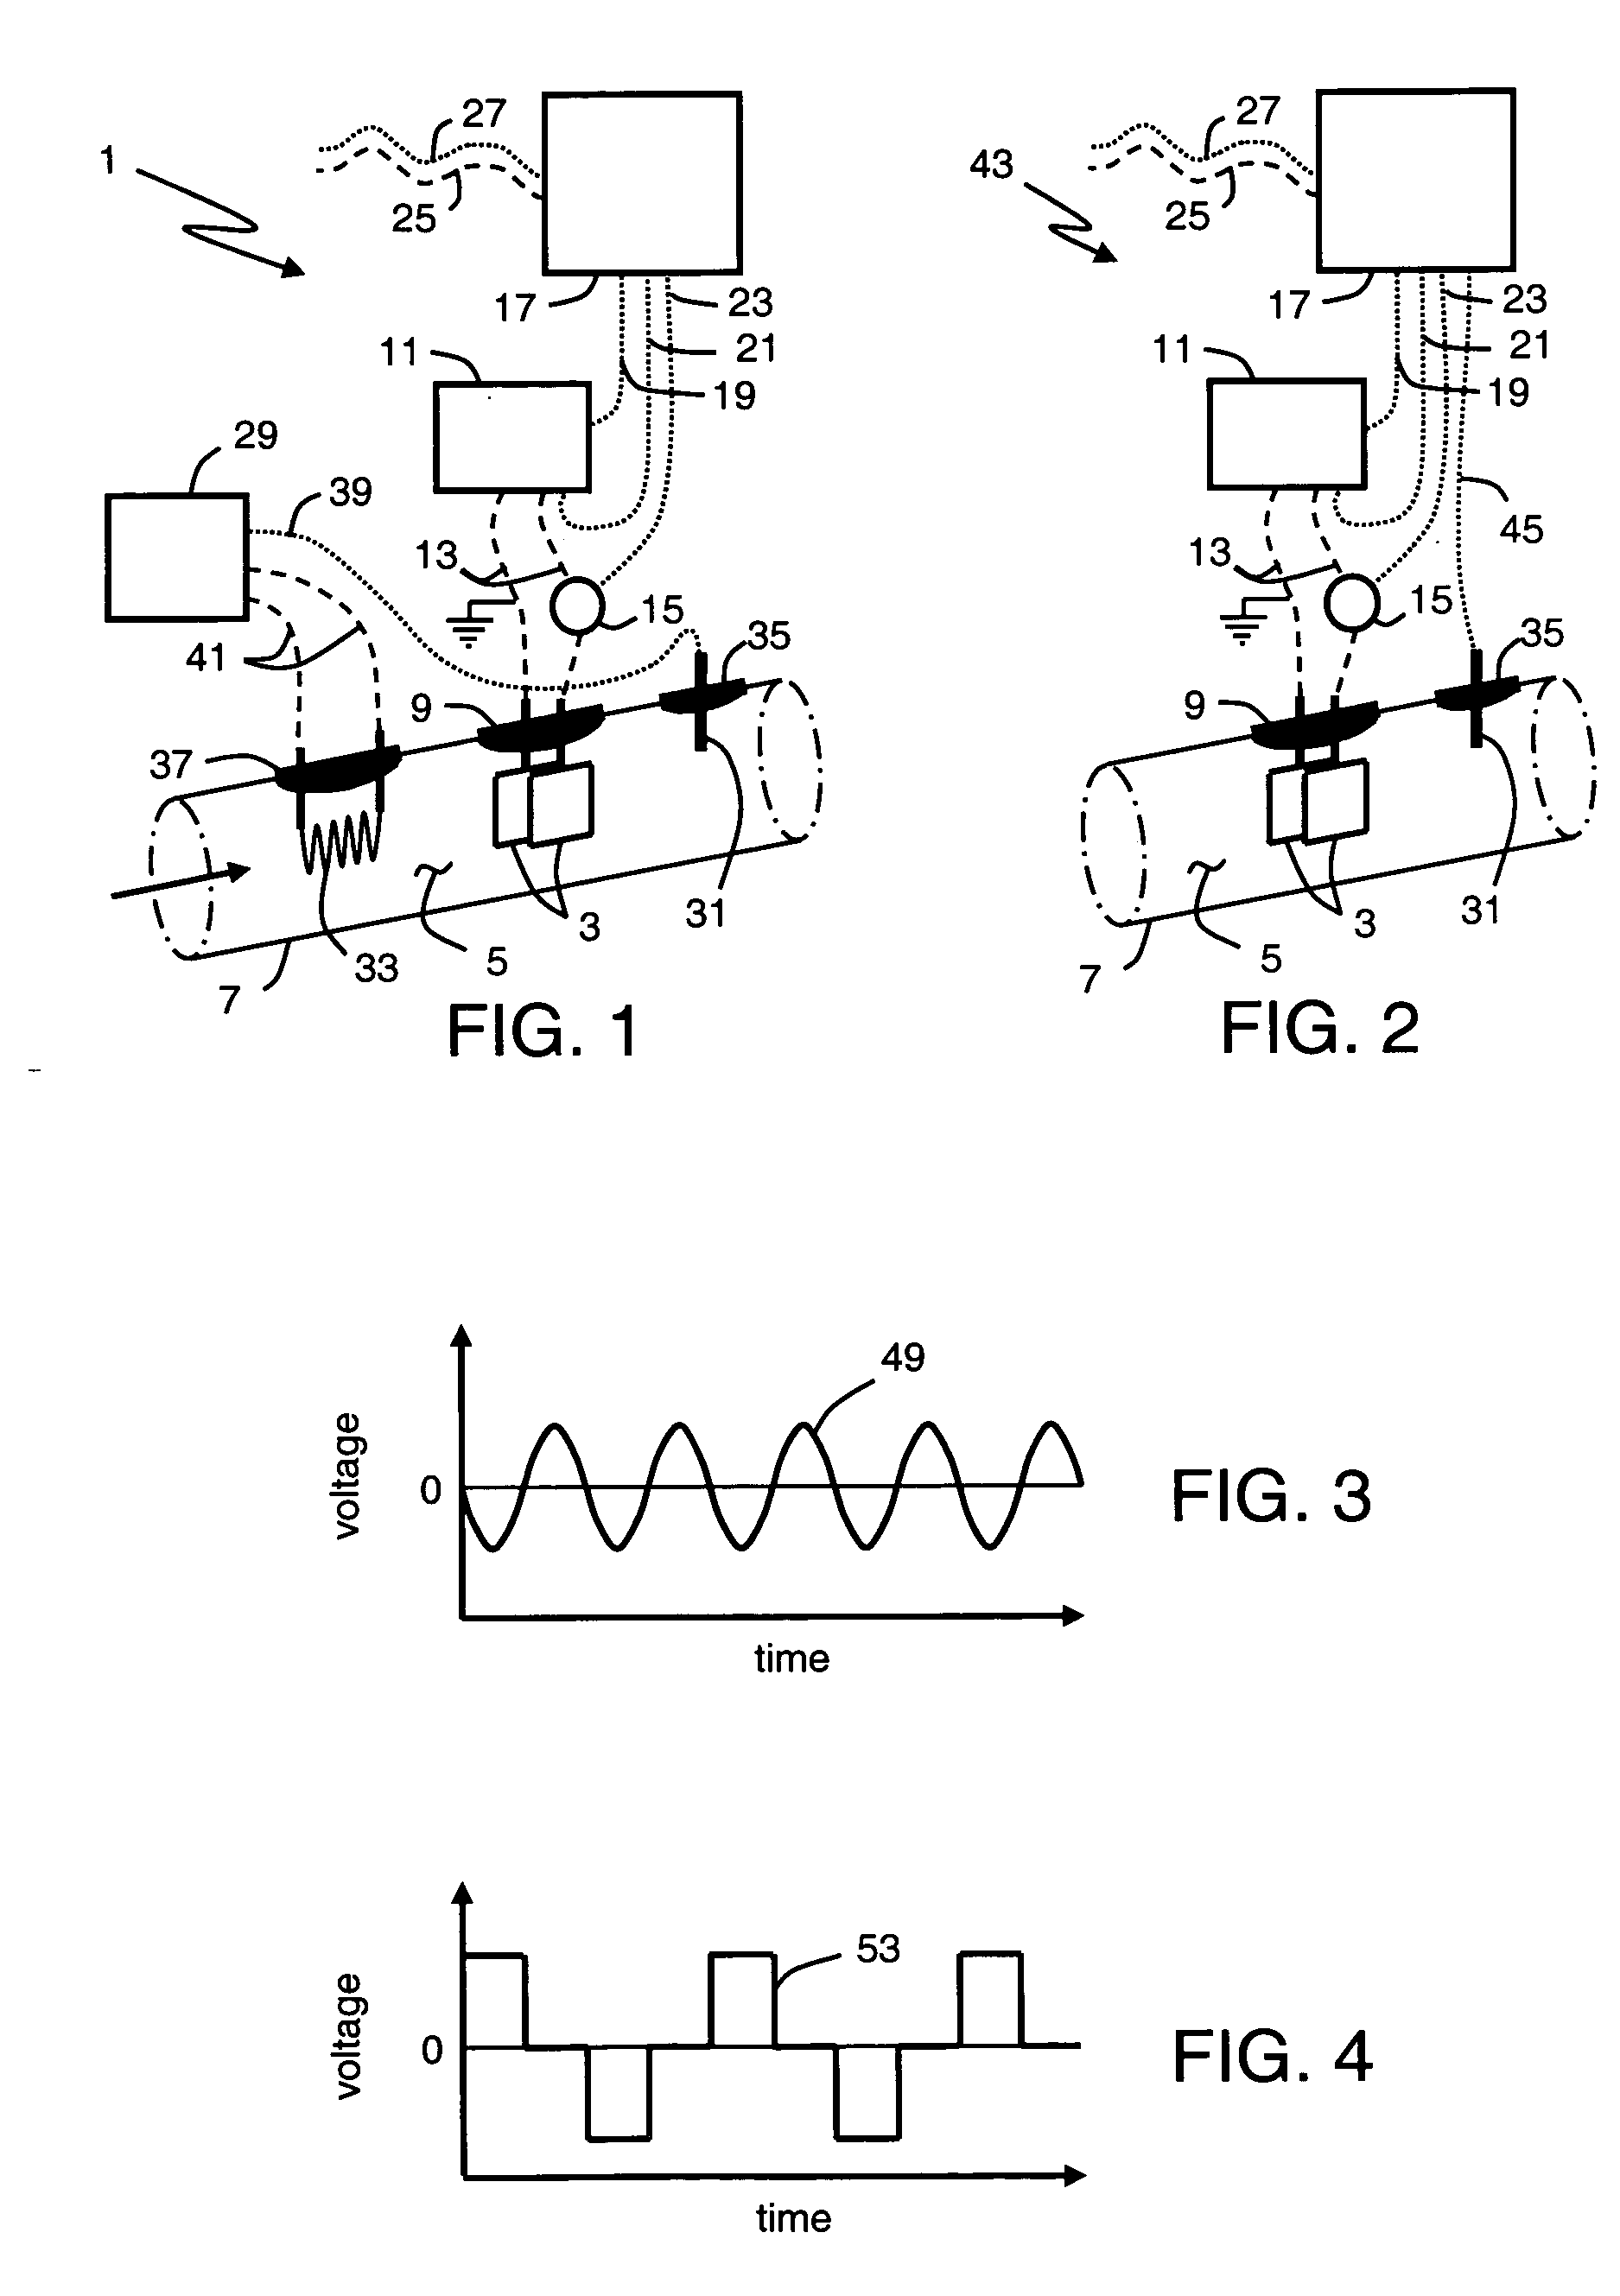 Method for on-line monitoring of condition of non-aqueous fluids